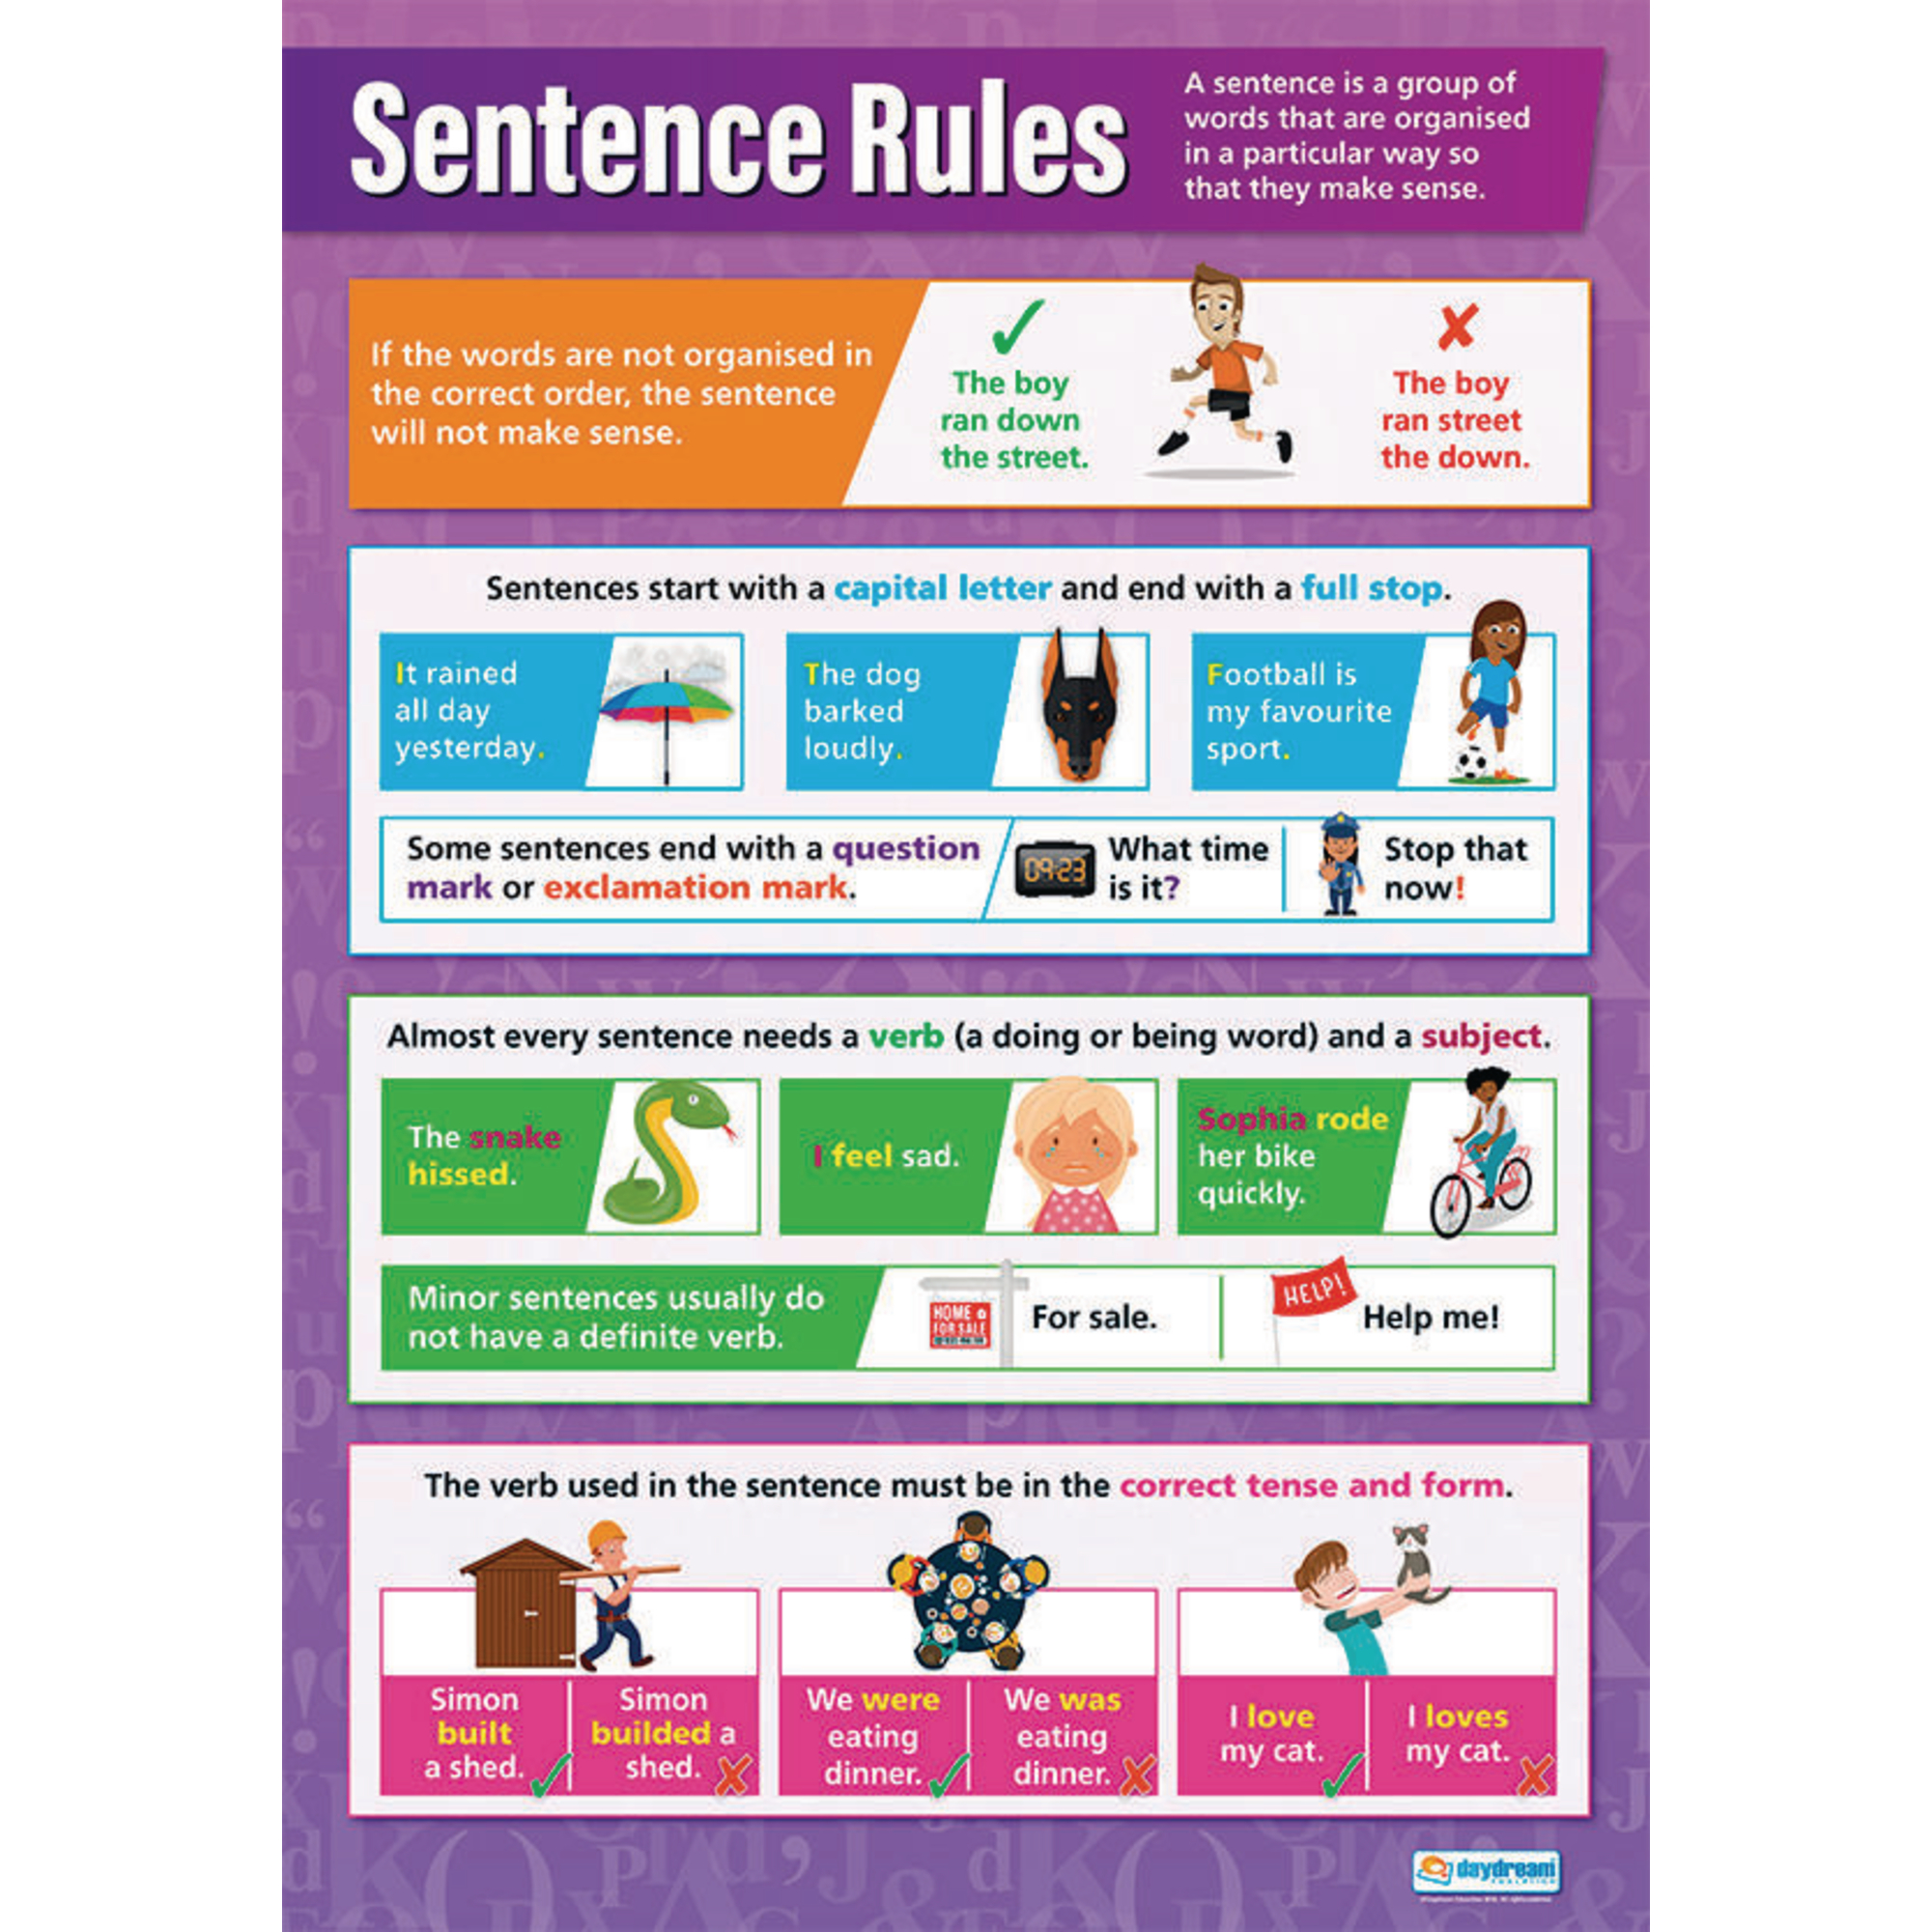 he1569537-daydream-education-sentence-rules-poster-hope-education